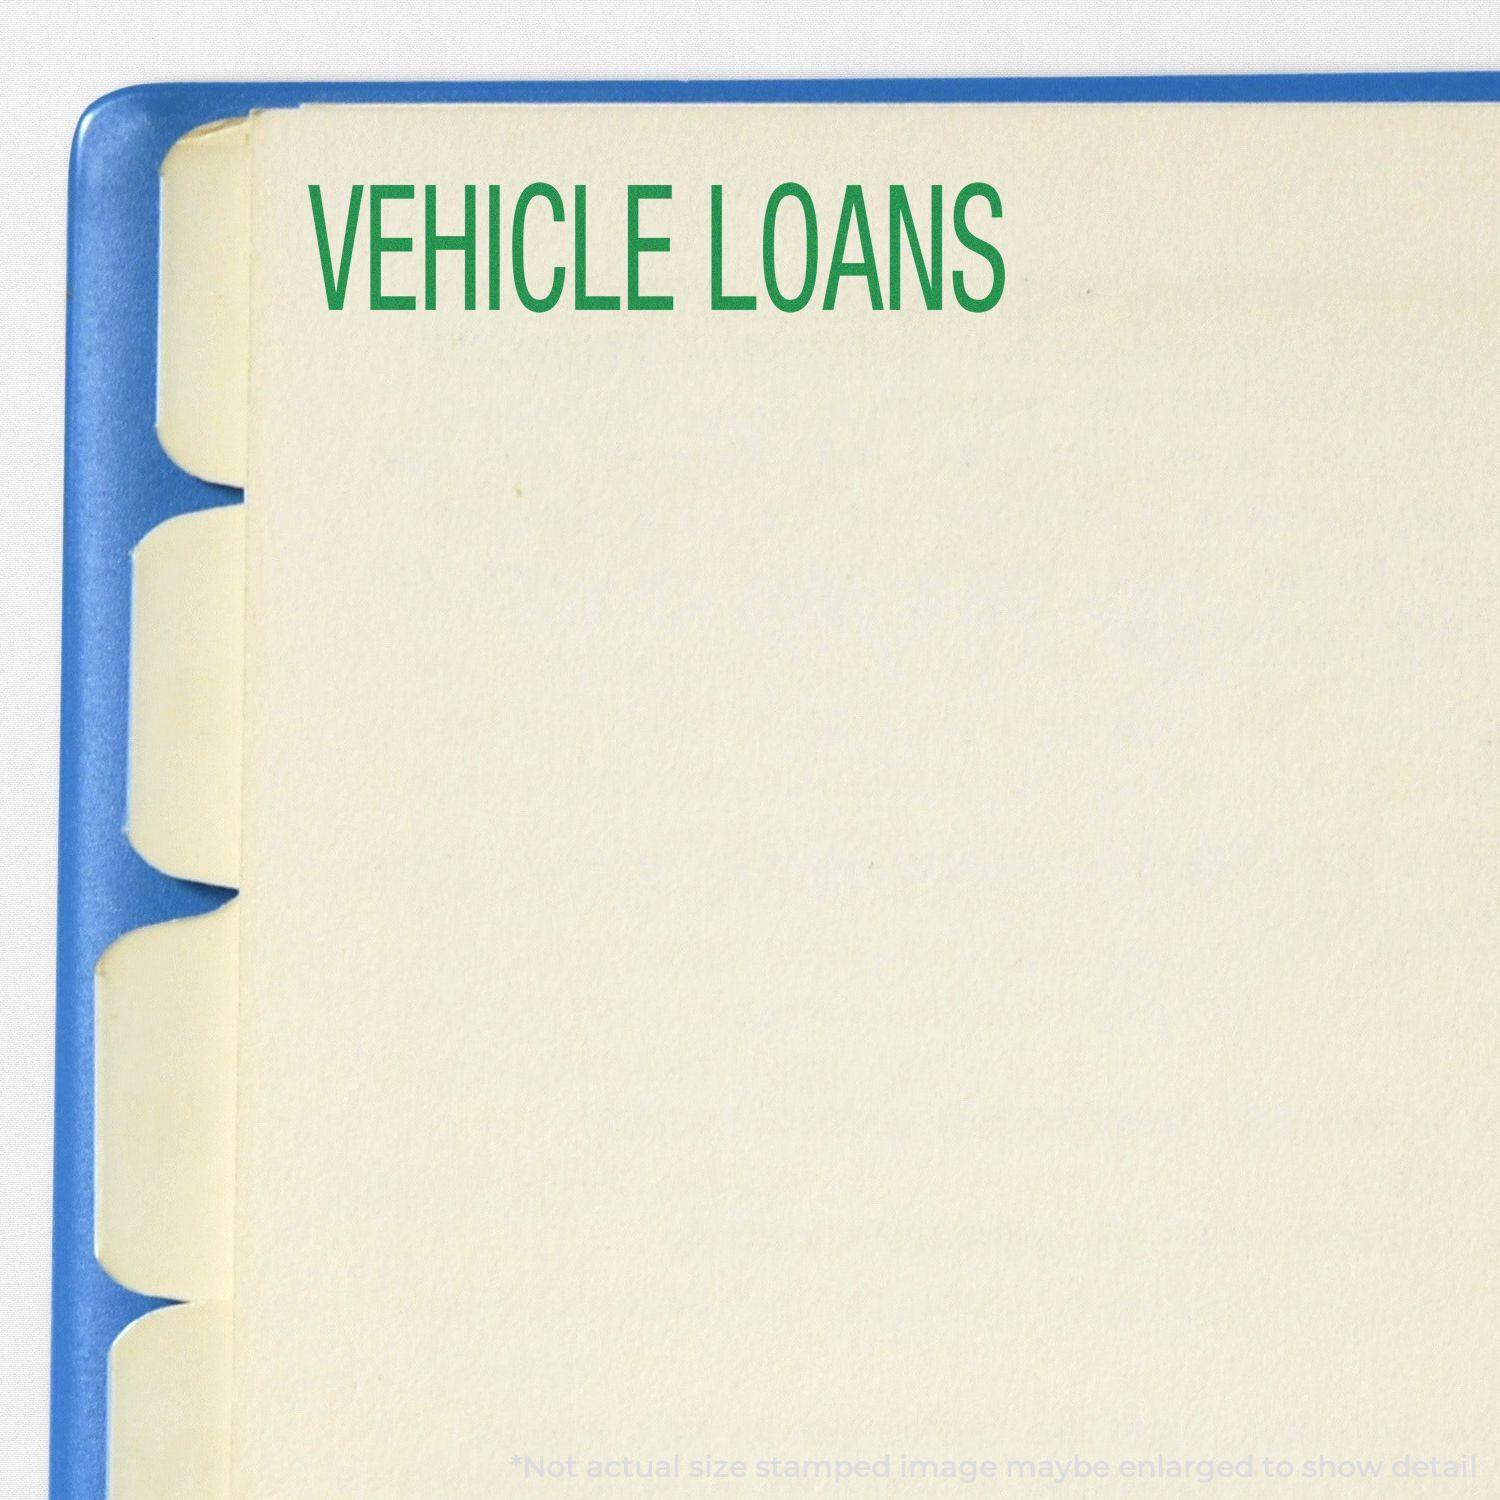 A self-inking stamp with a stamped image showing how the text "VEHICLE LOANS" in a large bold font is displayed by it.